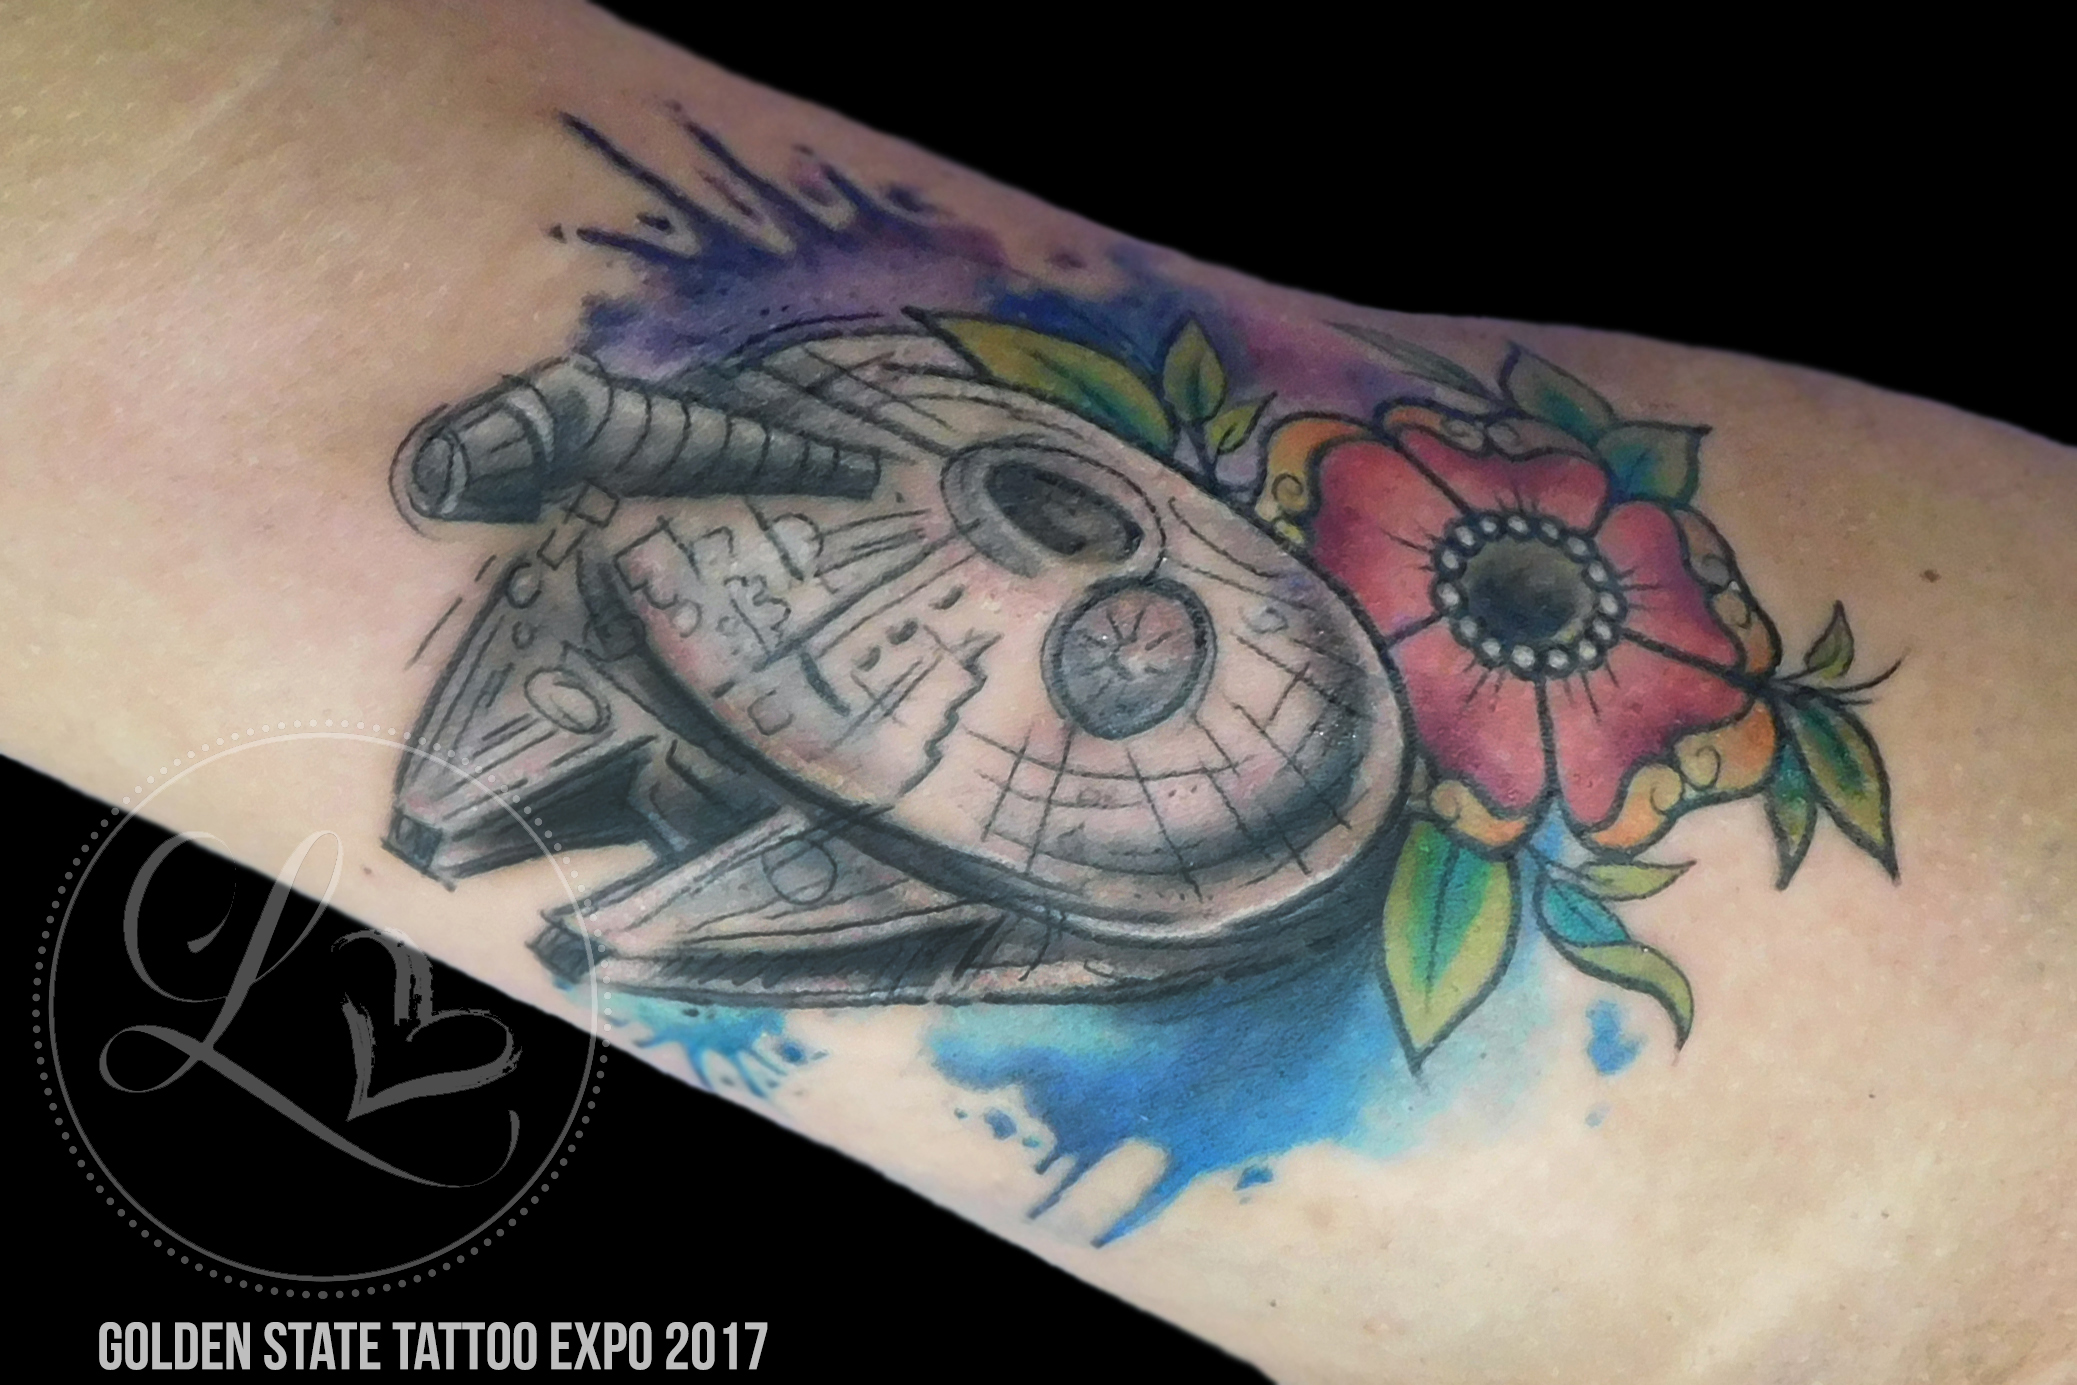 Watercolor Star Wars millenium falcon tattoo with flowers